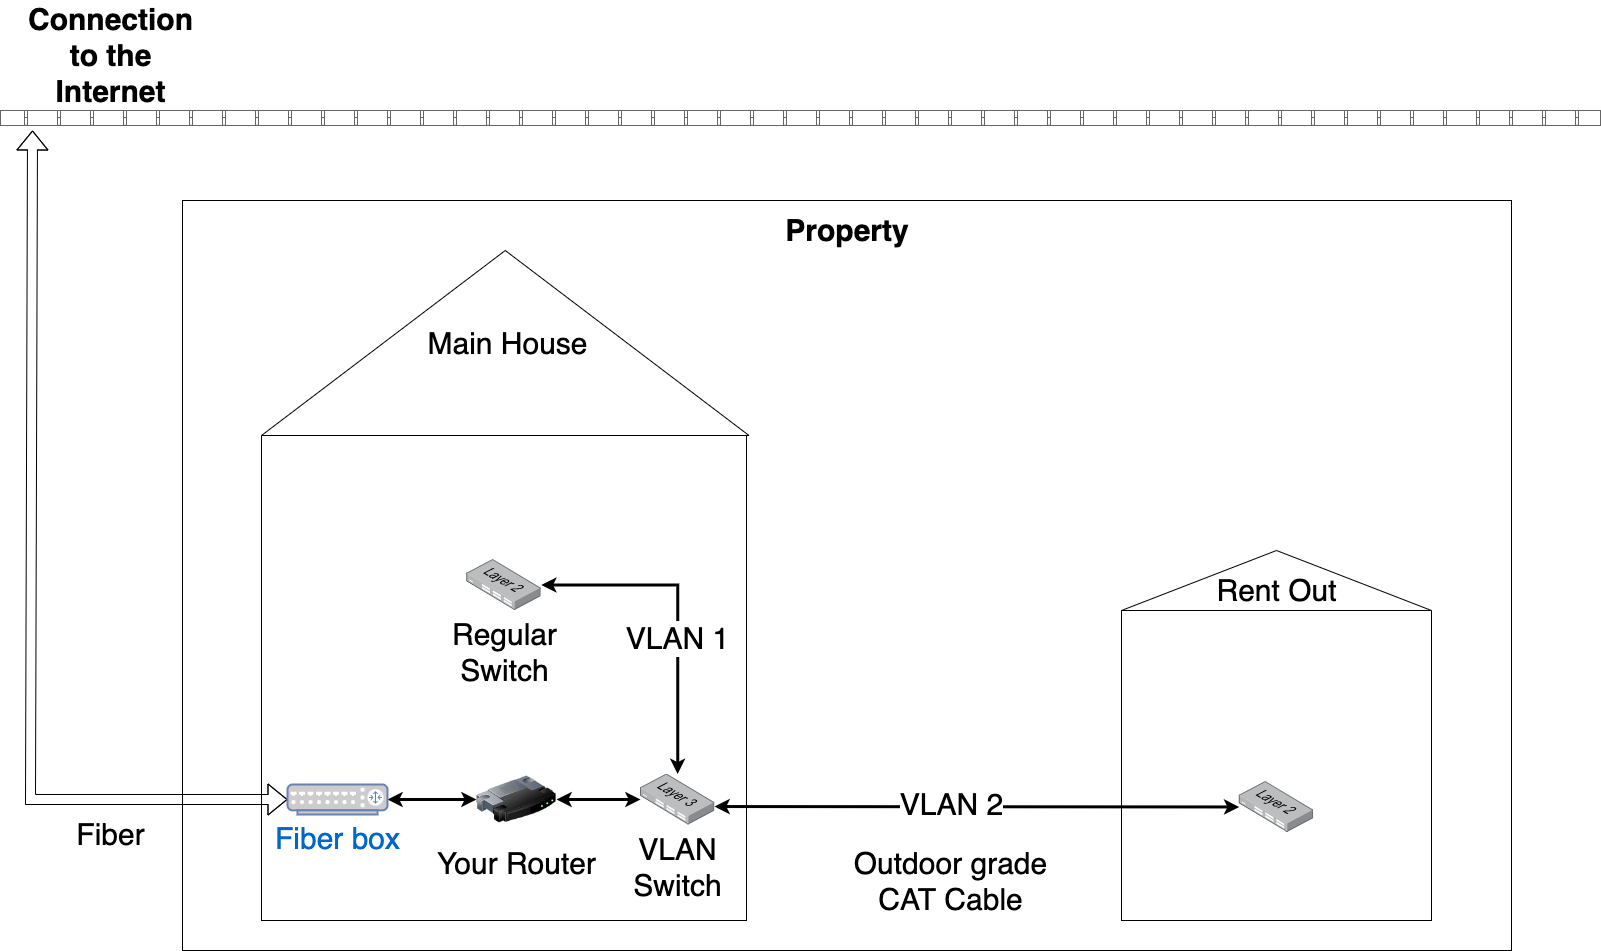 Sharing your Internet connection with between multiple houses with VLANs